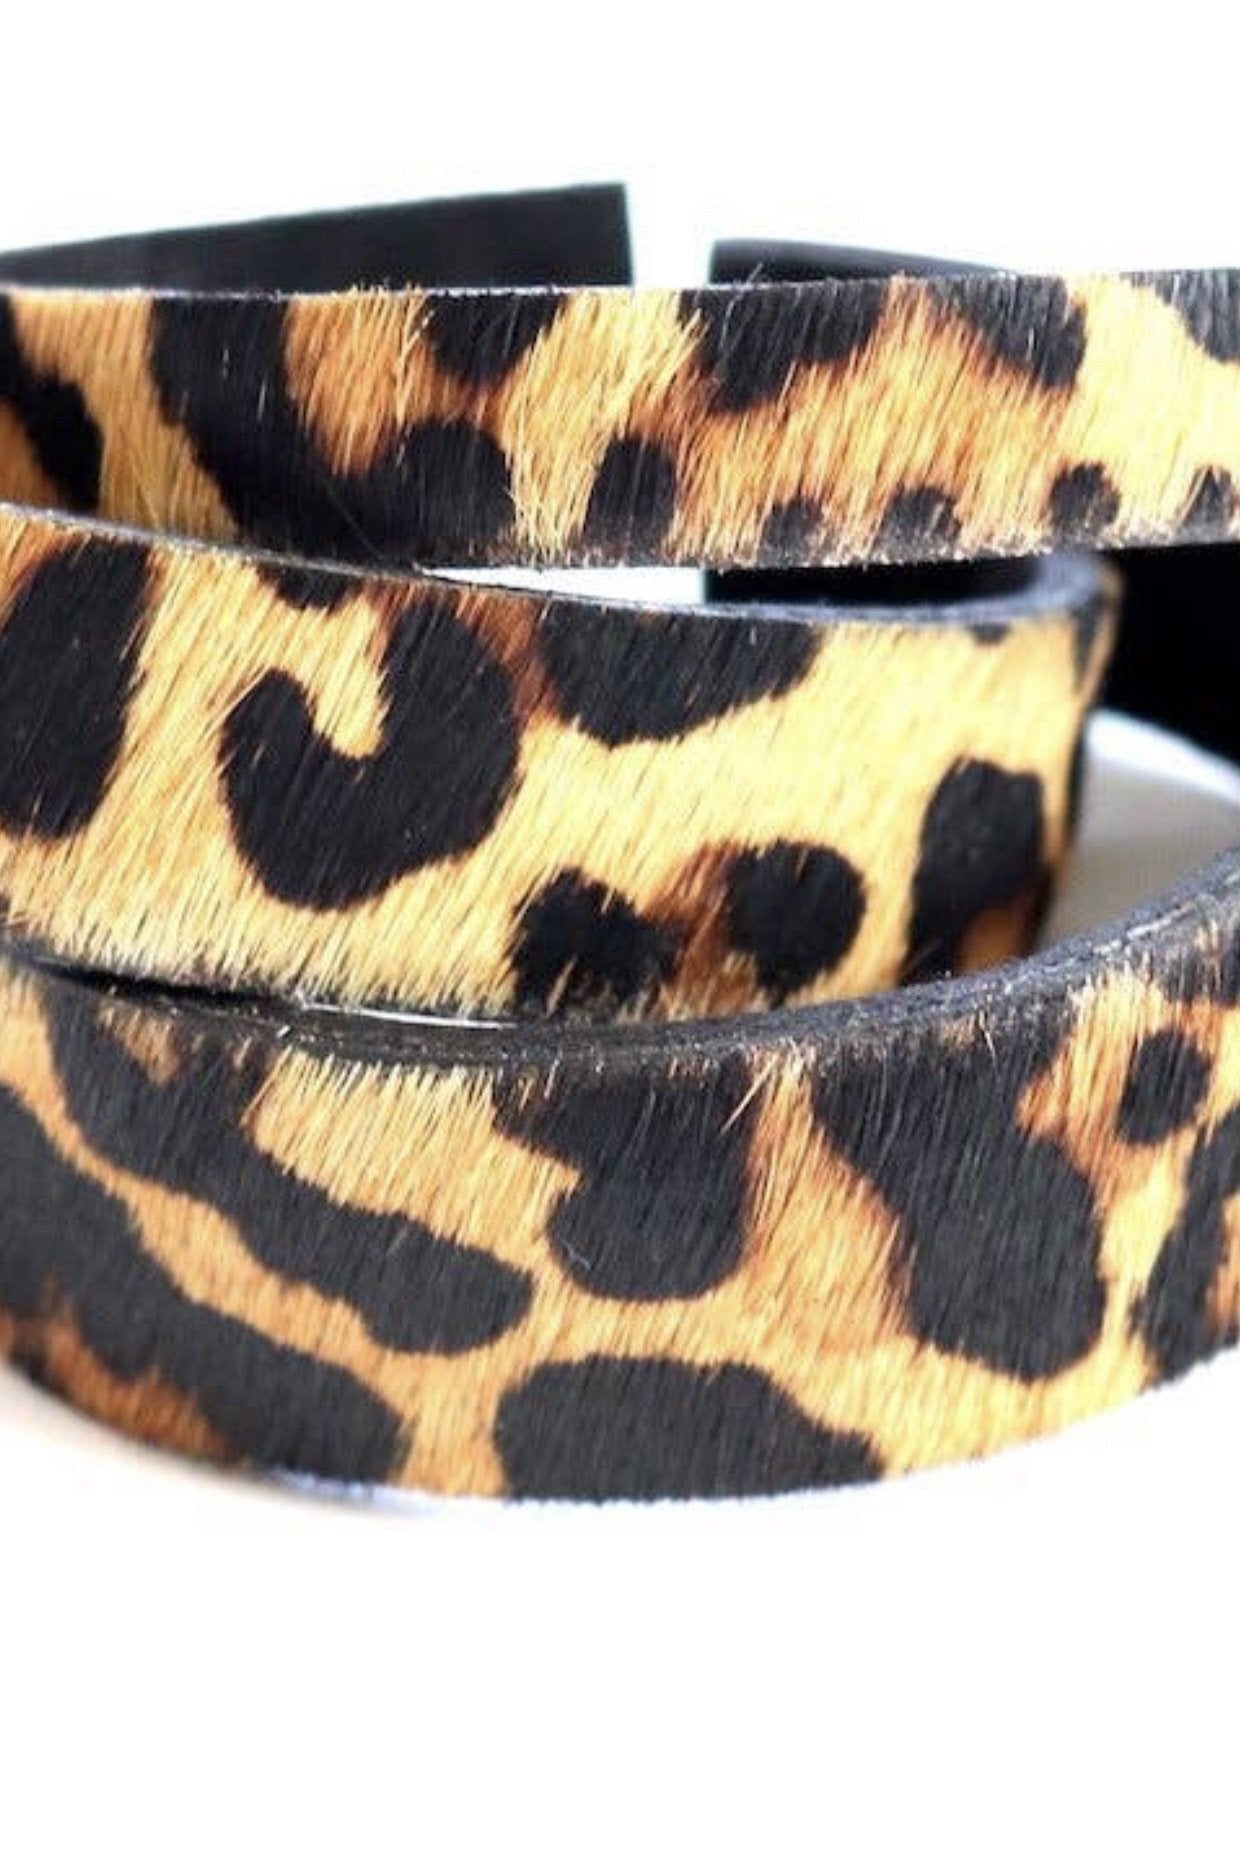 Animal Print Cuff Bracelet Set - Corinne Boutique Family Owned and Operated USA